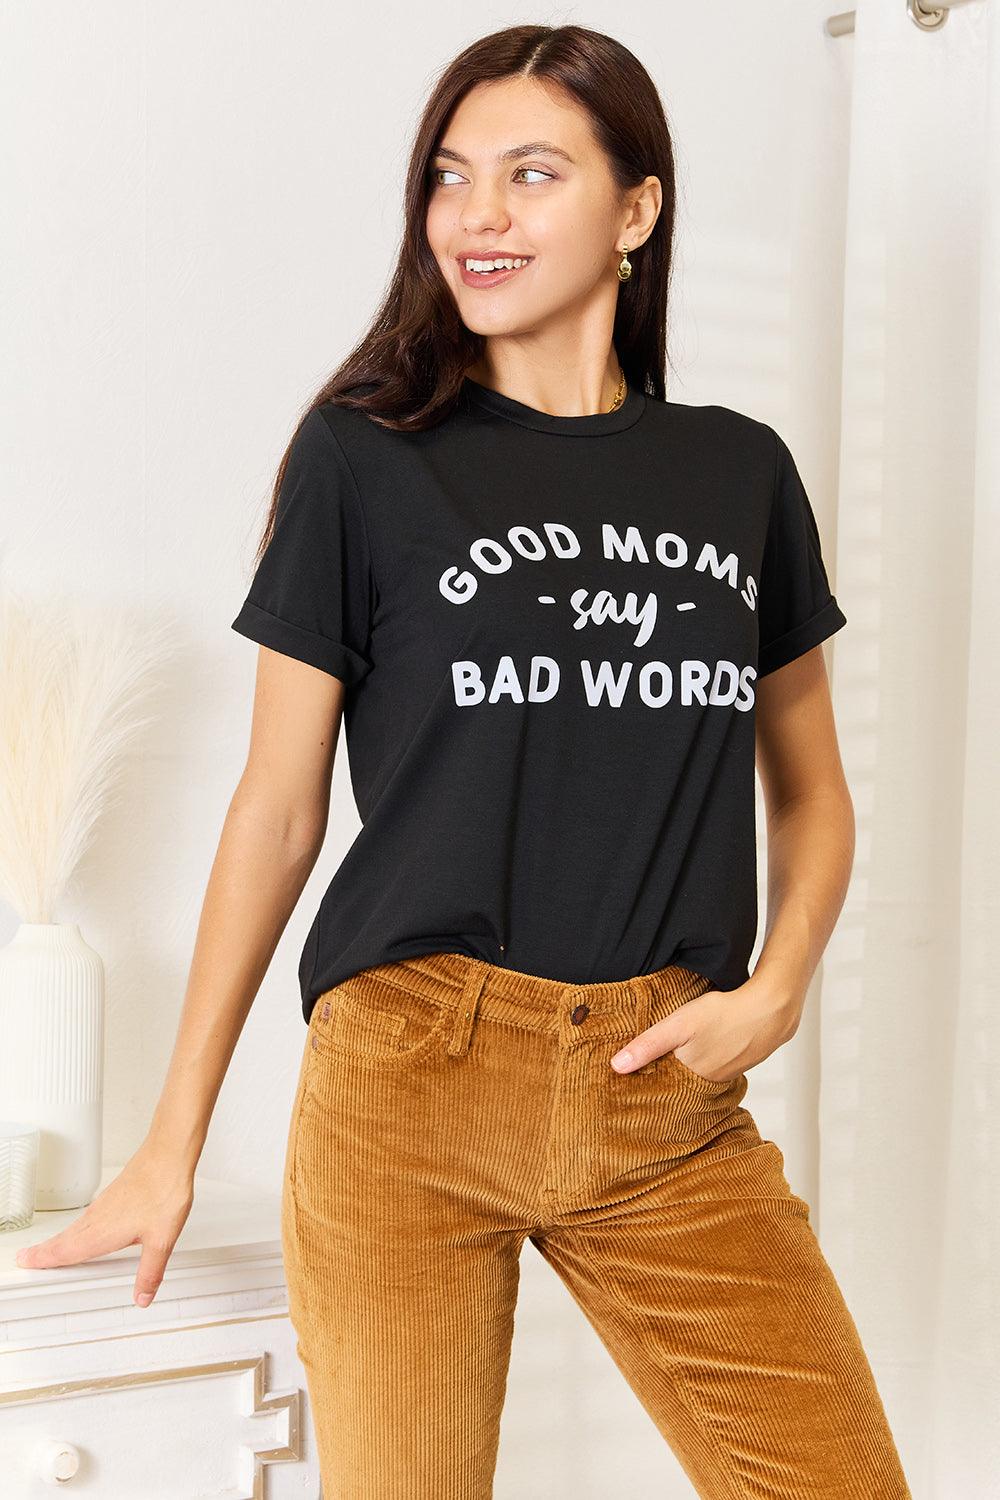 Women's Shirts Simply Love GOOD MOMS SAY BAD WORDS Graphic Tee